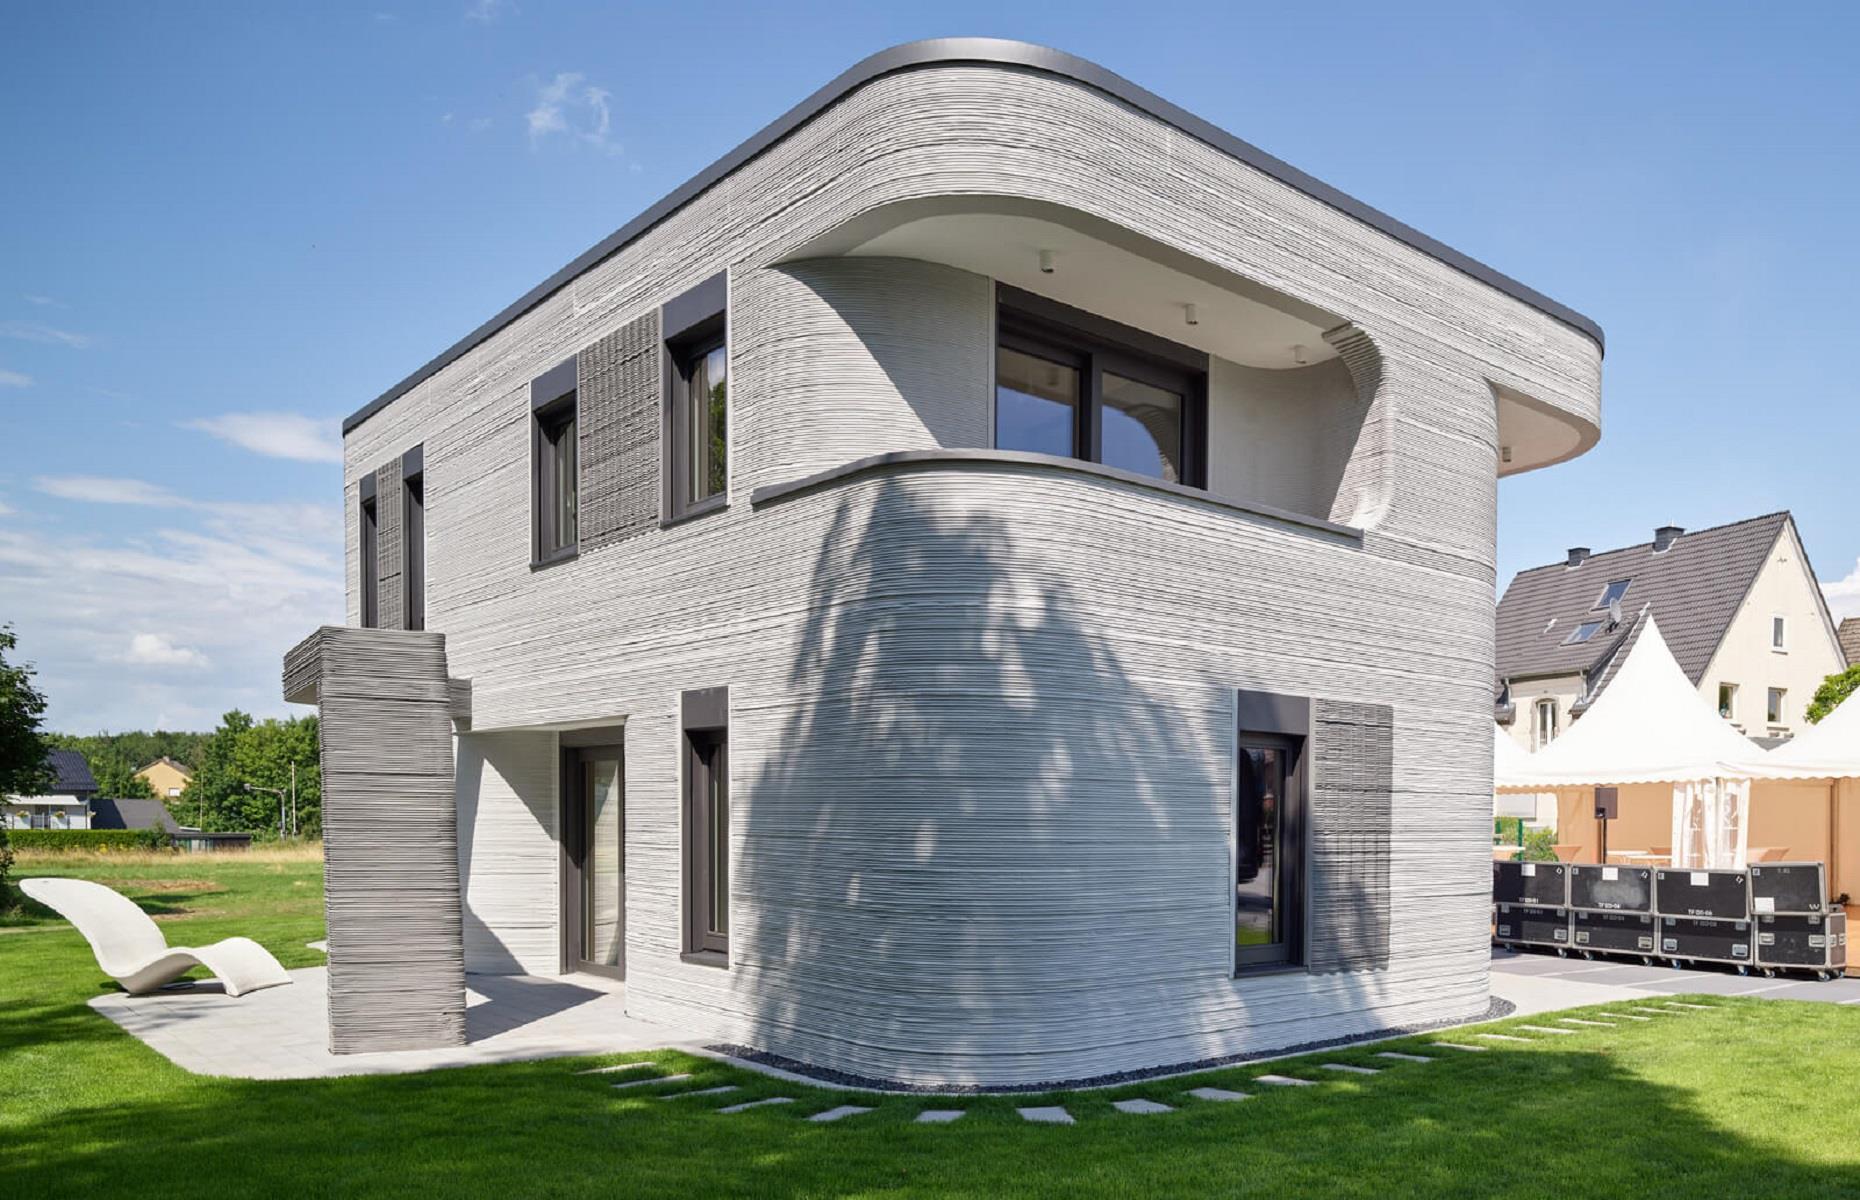 <p>It's not just America where 3D-printing technology is taking off. Always at the forefront of technology and innovation, Germany was among the first countries to design and construct a 3D-printed house. The property was built in July 2021 in Beckum, North Rhine-Westphalia by <a href="https://www.peri.com/en/">PERI</a>, one of the leading manufacturers and suppliers of formwork and scaffold systems in the world. </p>